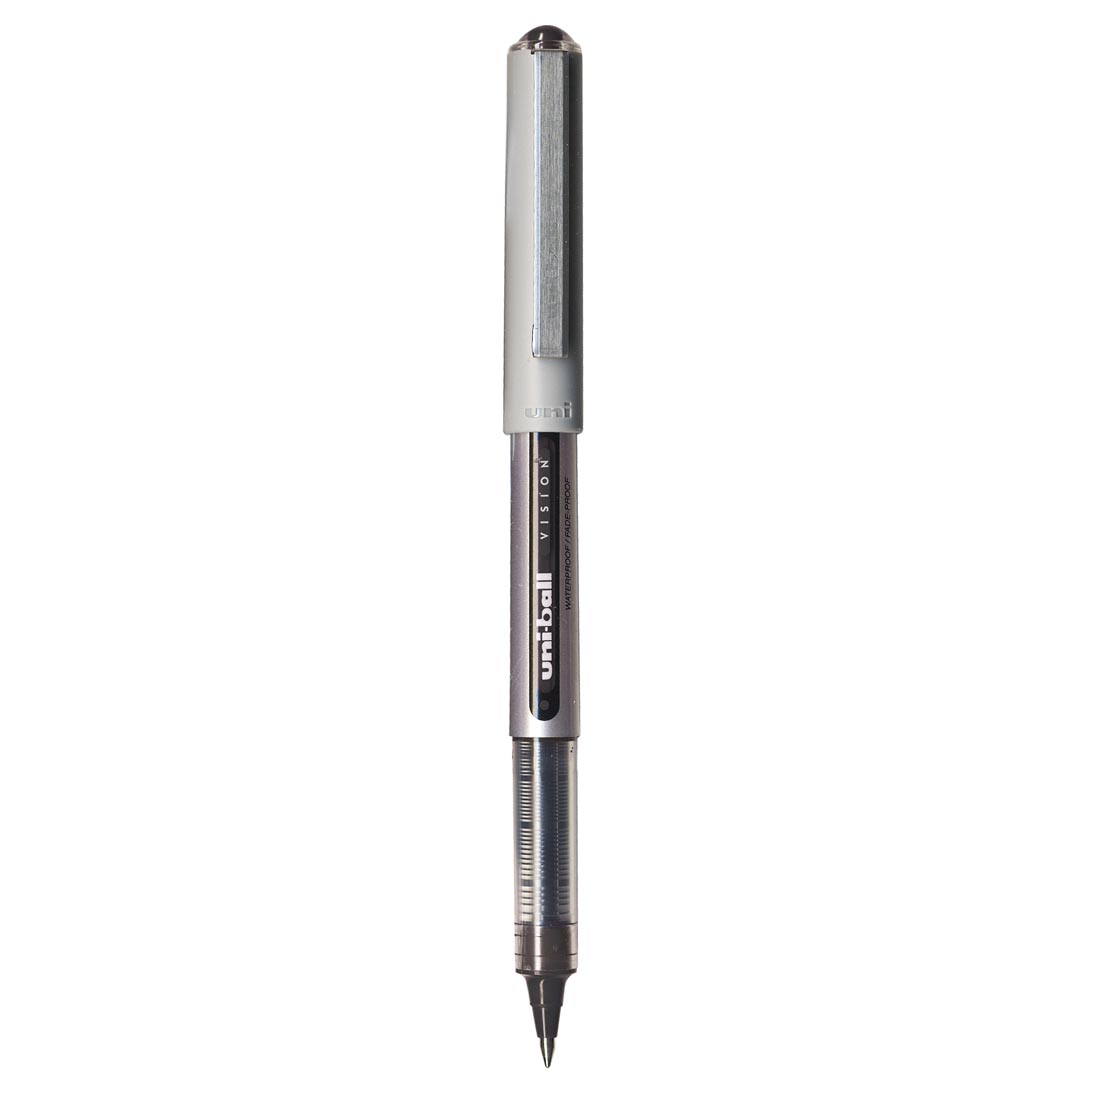 Black Uni-ball Vision Micro Tip Rollerball Pen with cap on opposite end